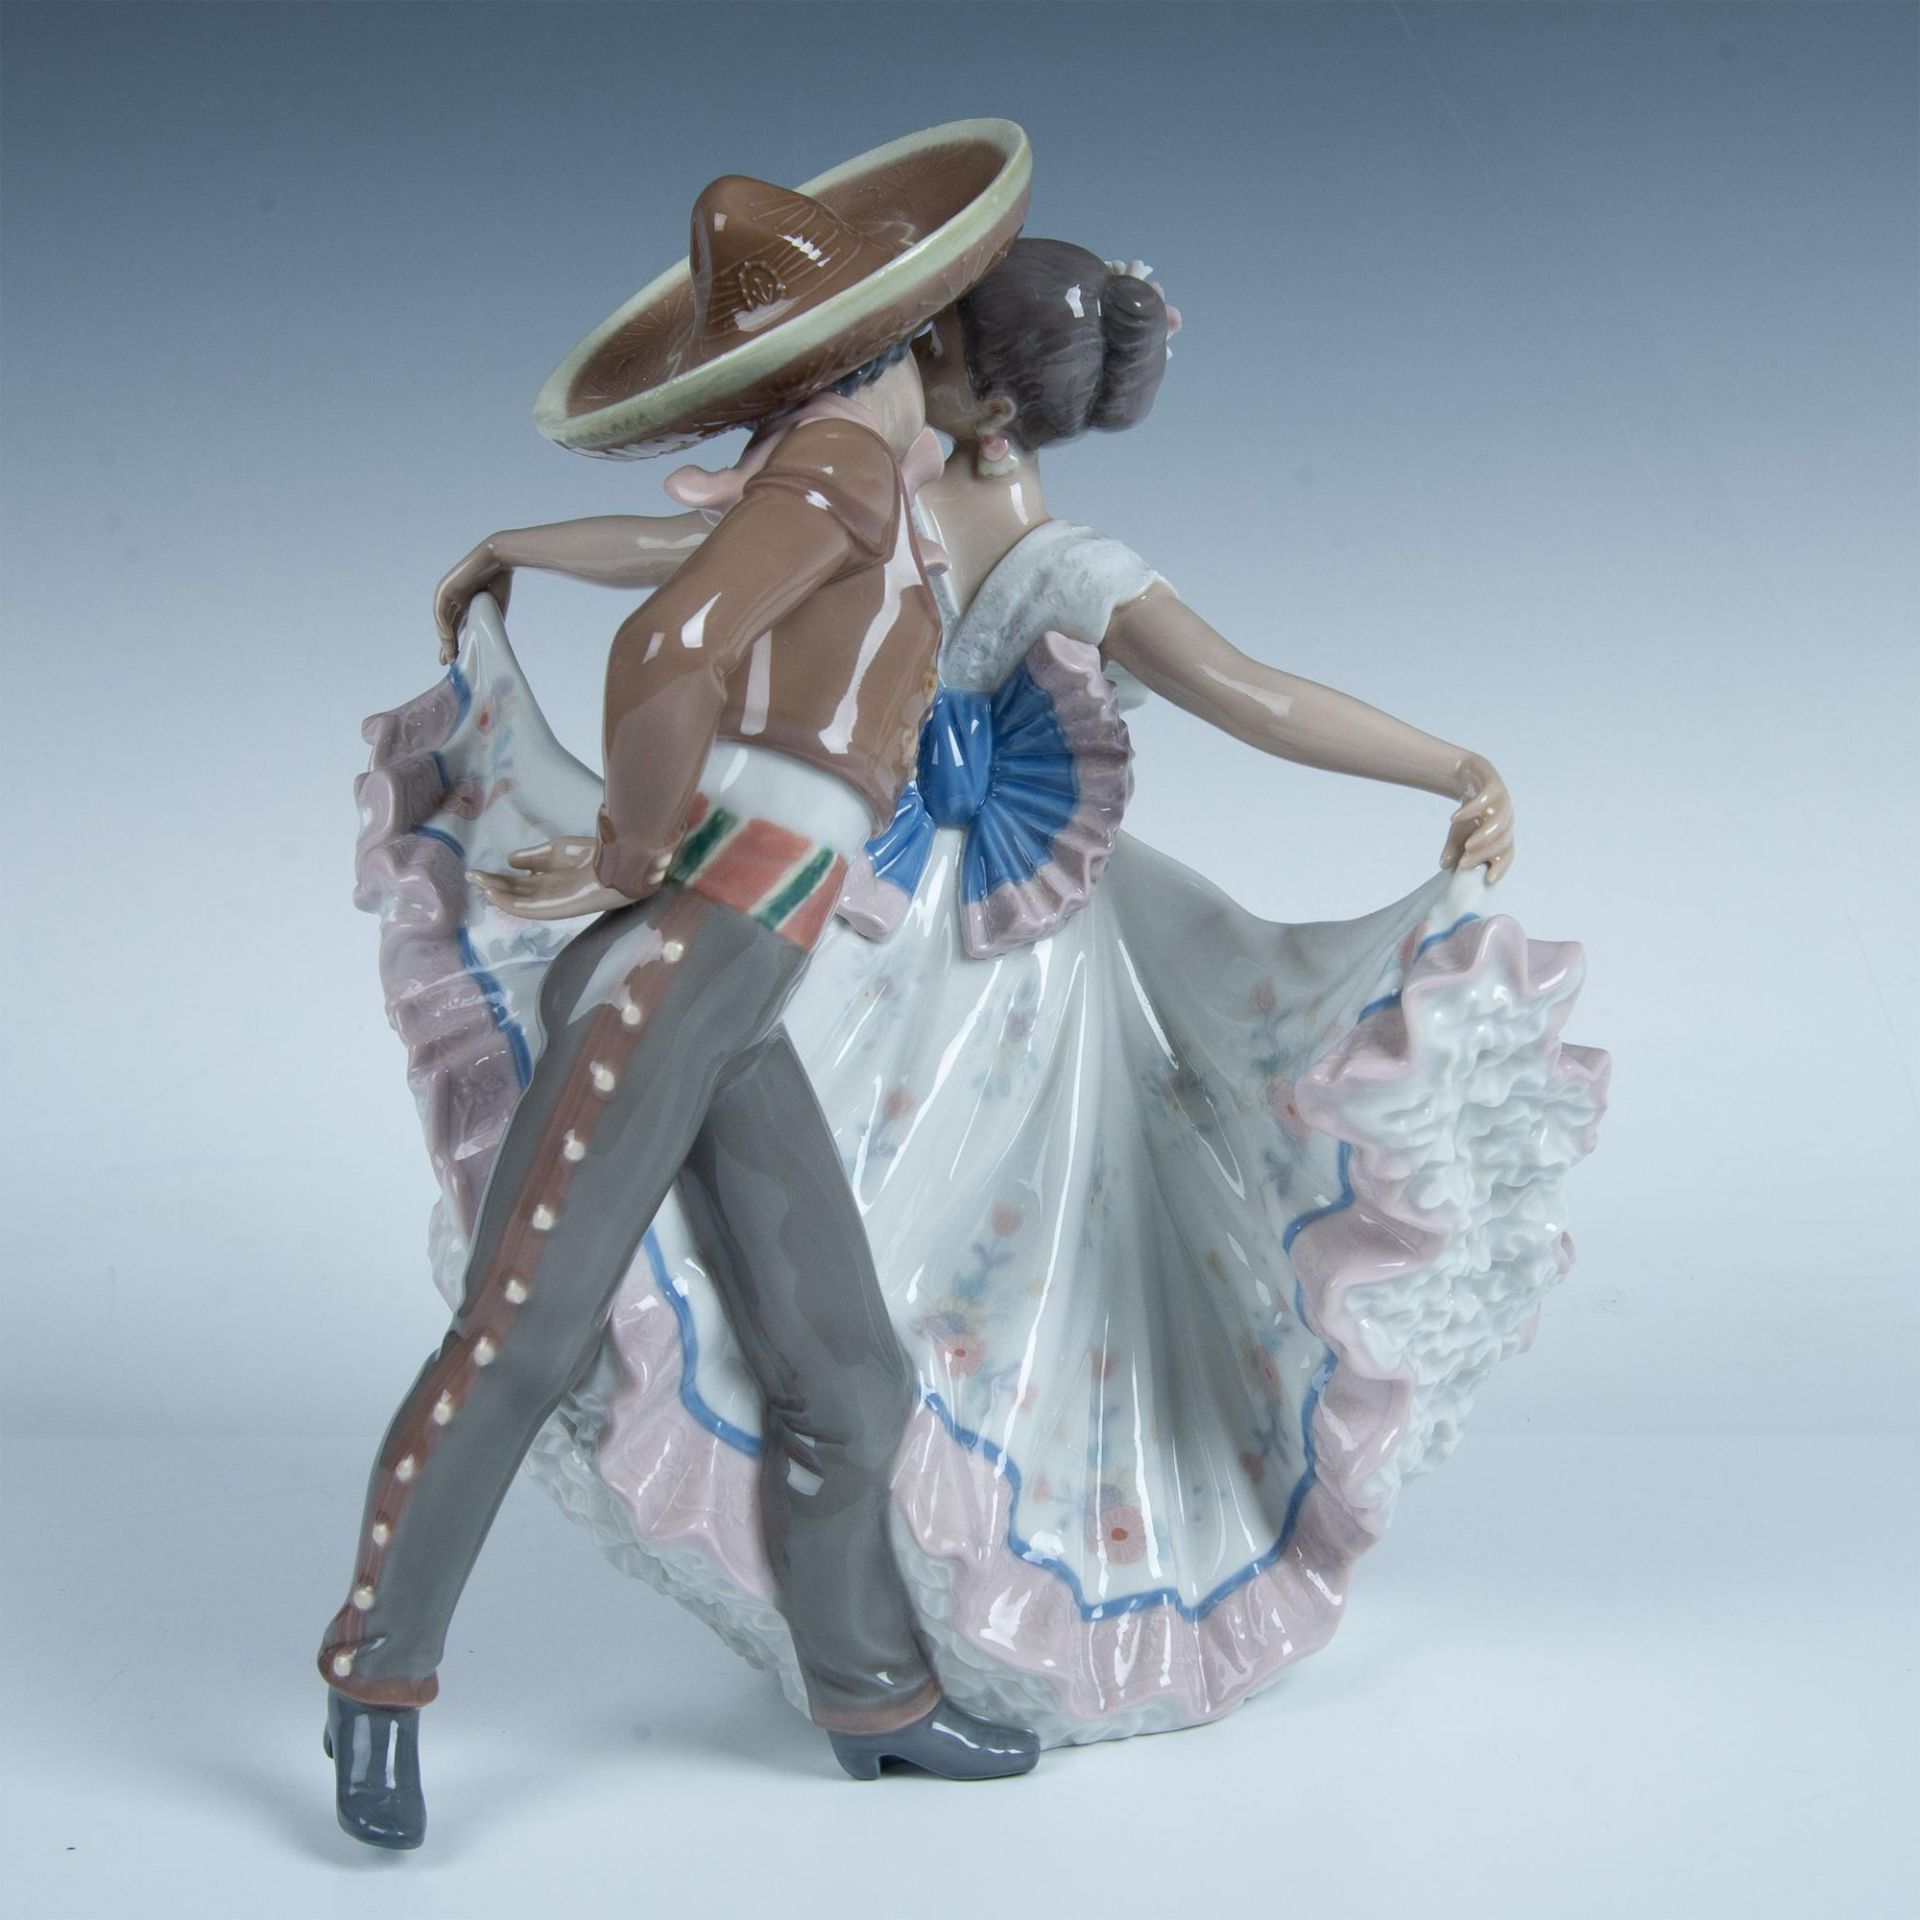 Mexican Dancers 1005415 - Lladro Porcelain Figurine - Image 5 of 8